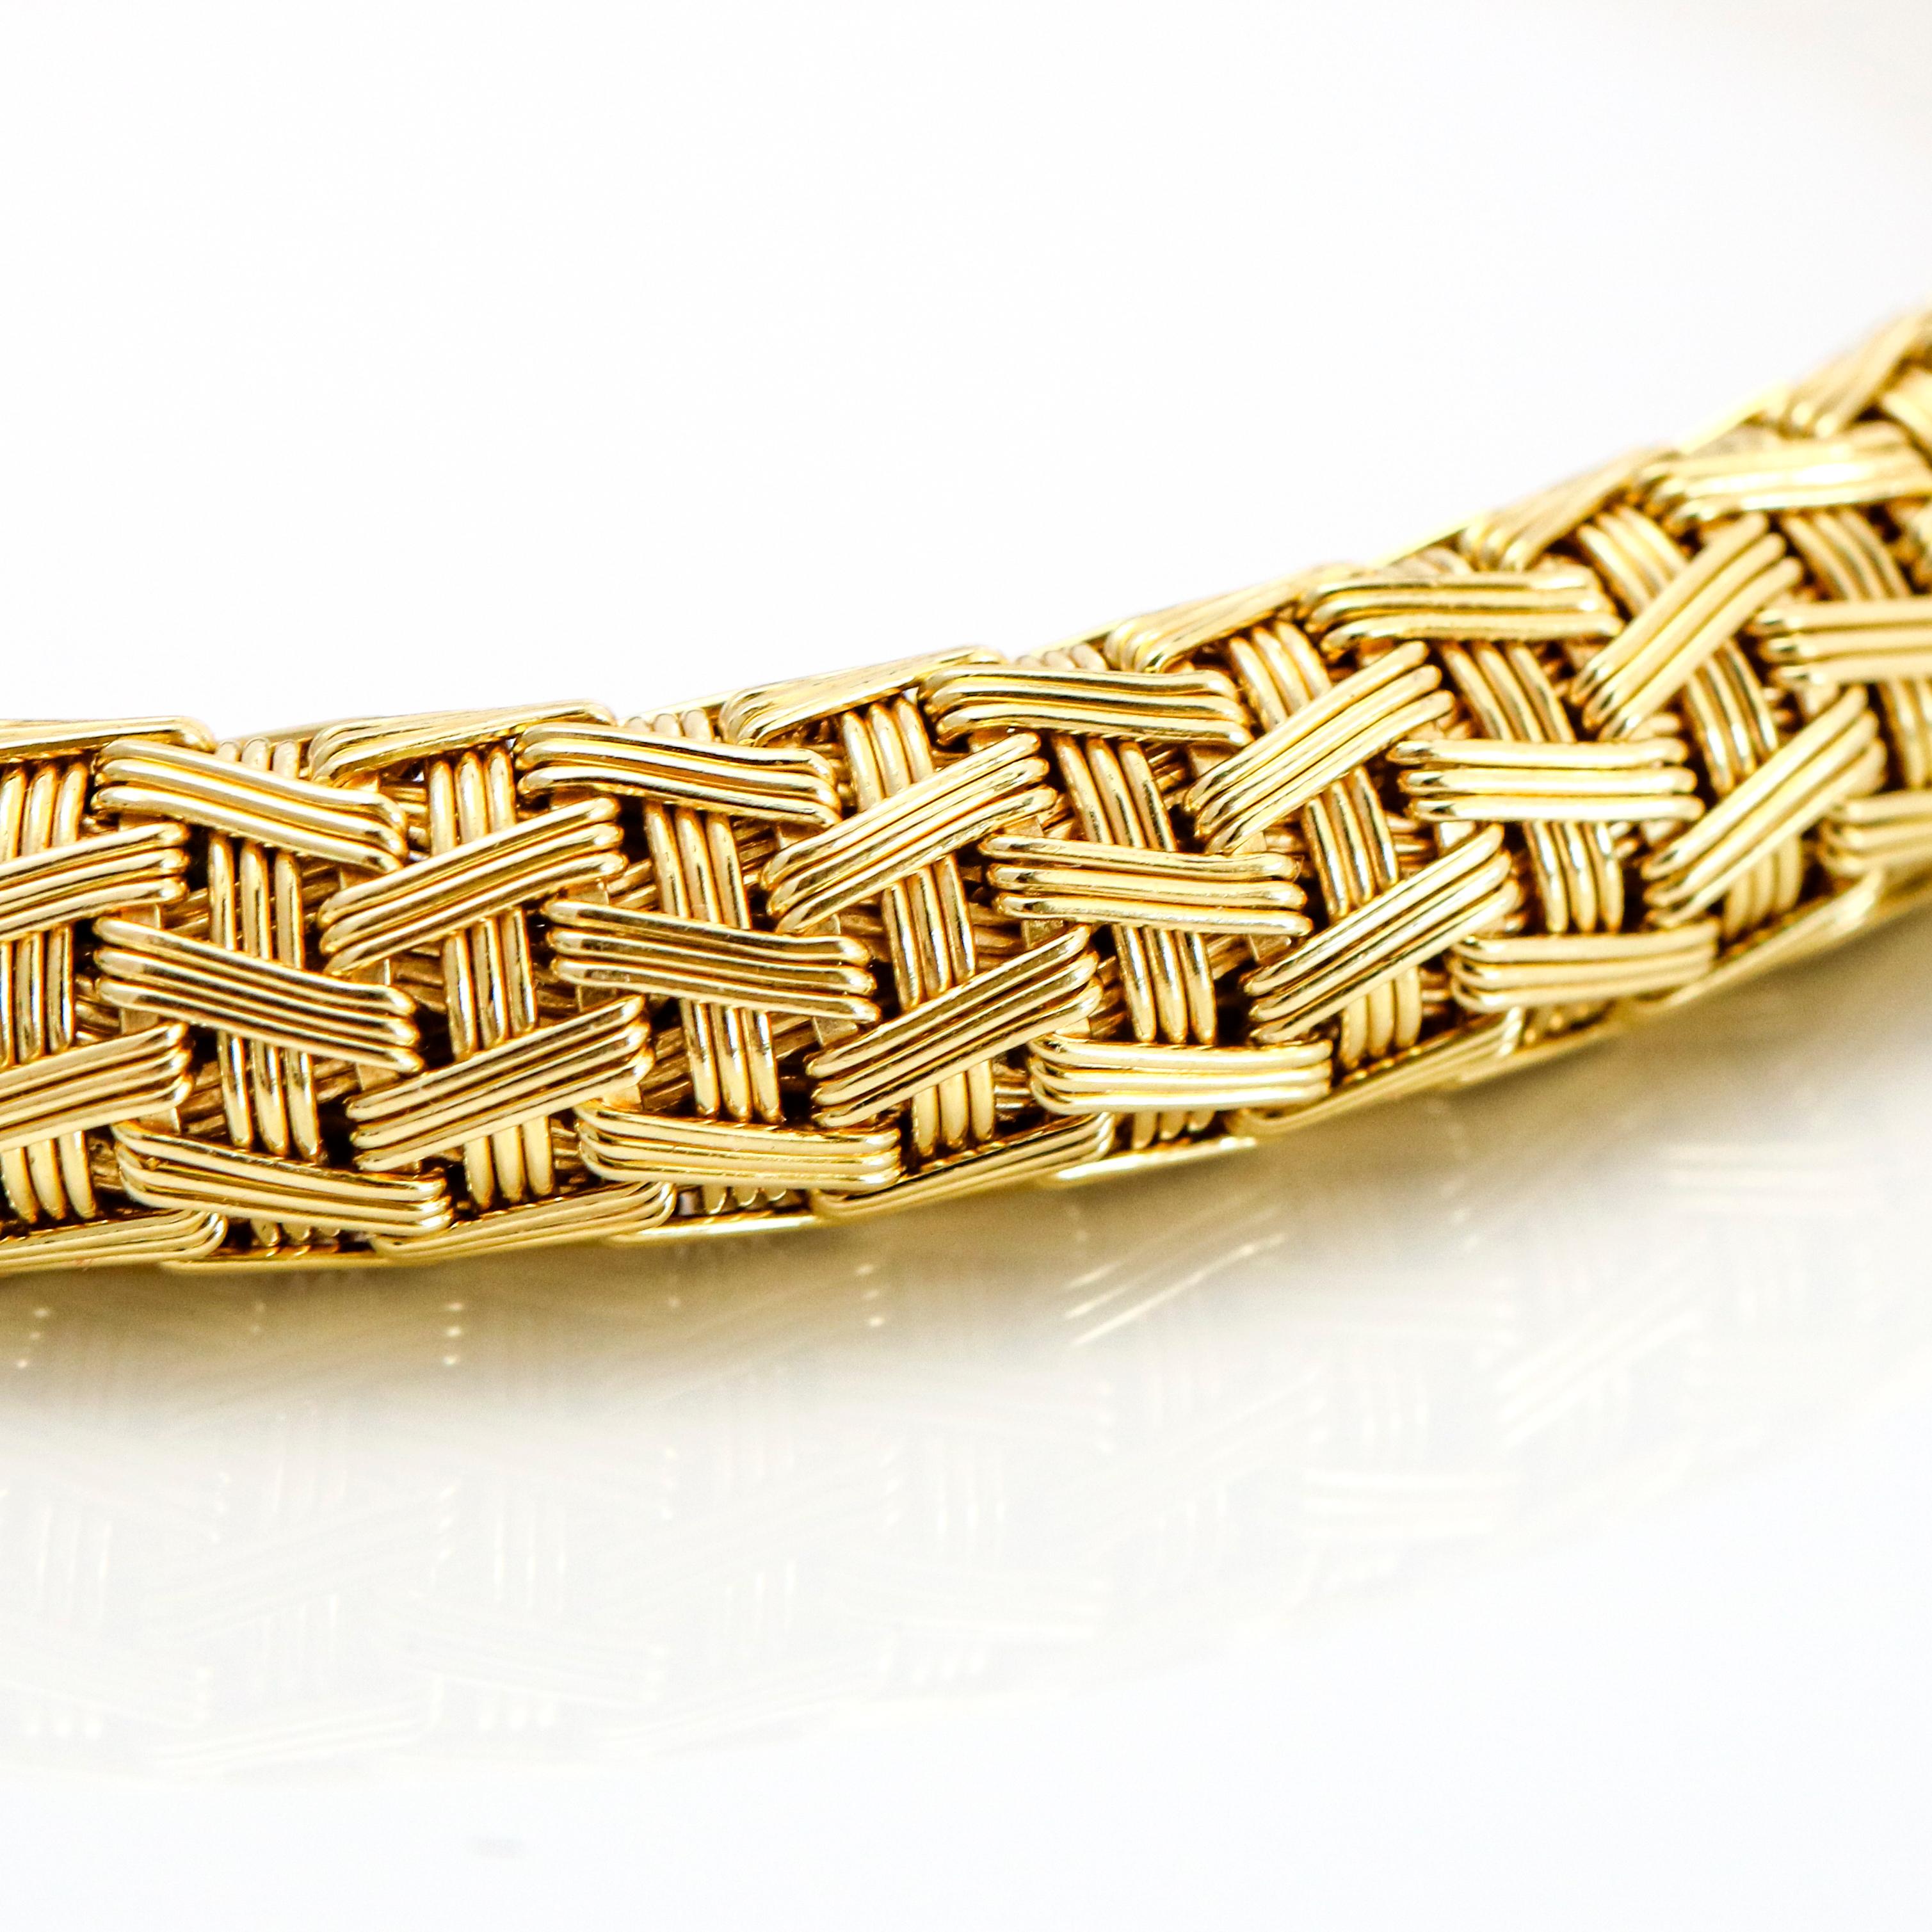 18 Karat Yellow Gold Woven Chain Bracelet In Excellent Condition For Sale In Fort Lauderdale, FL